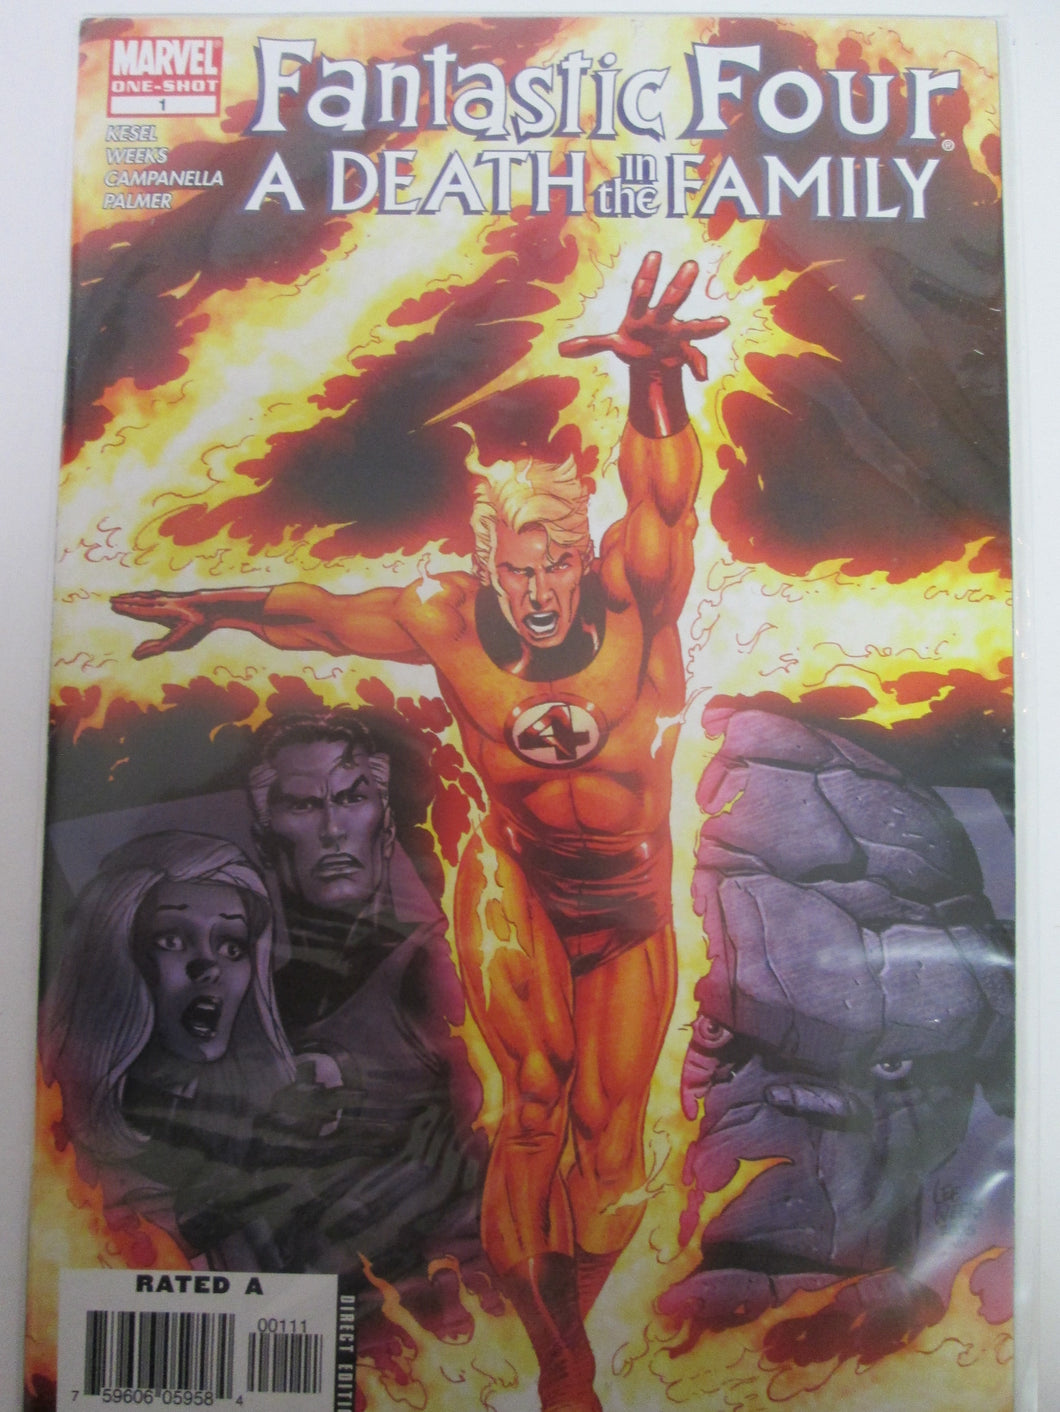 Fantastic Four A Death in the Family One Shot # 1 (Marvel)